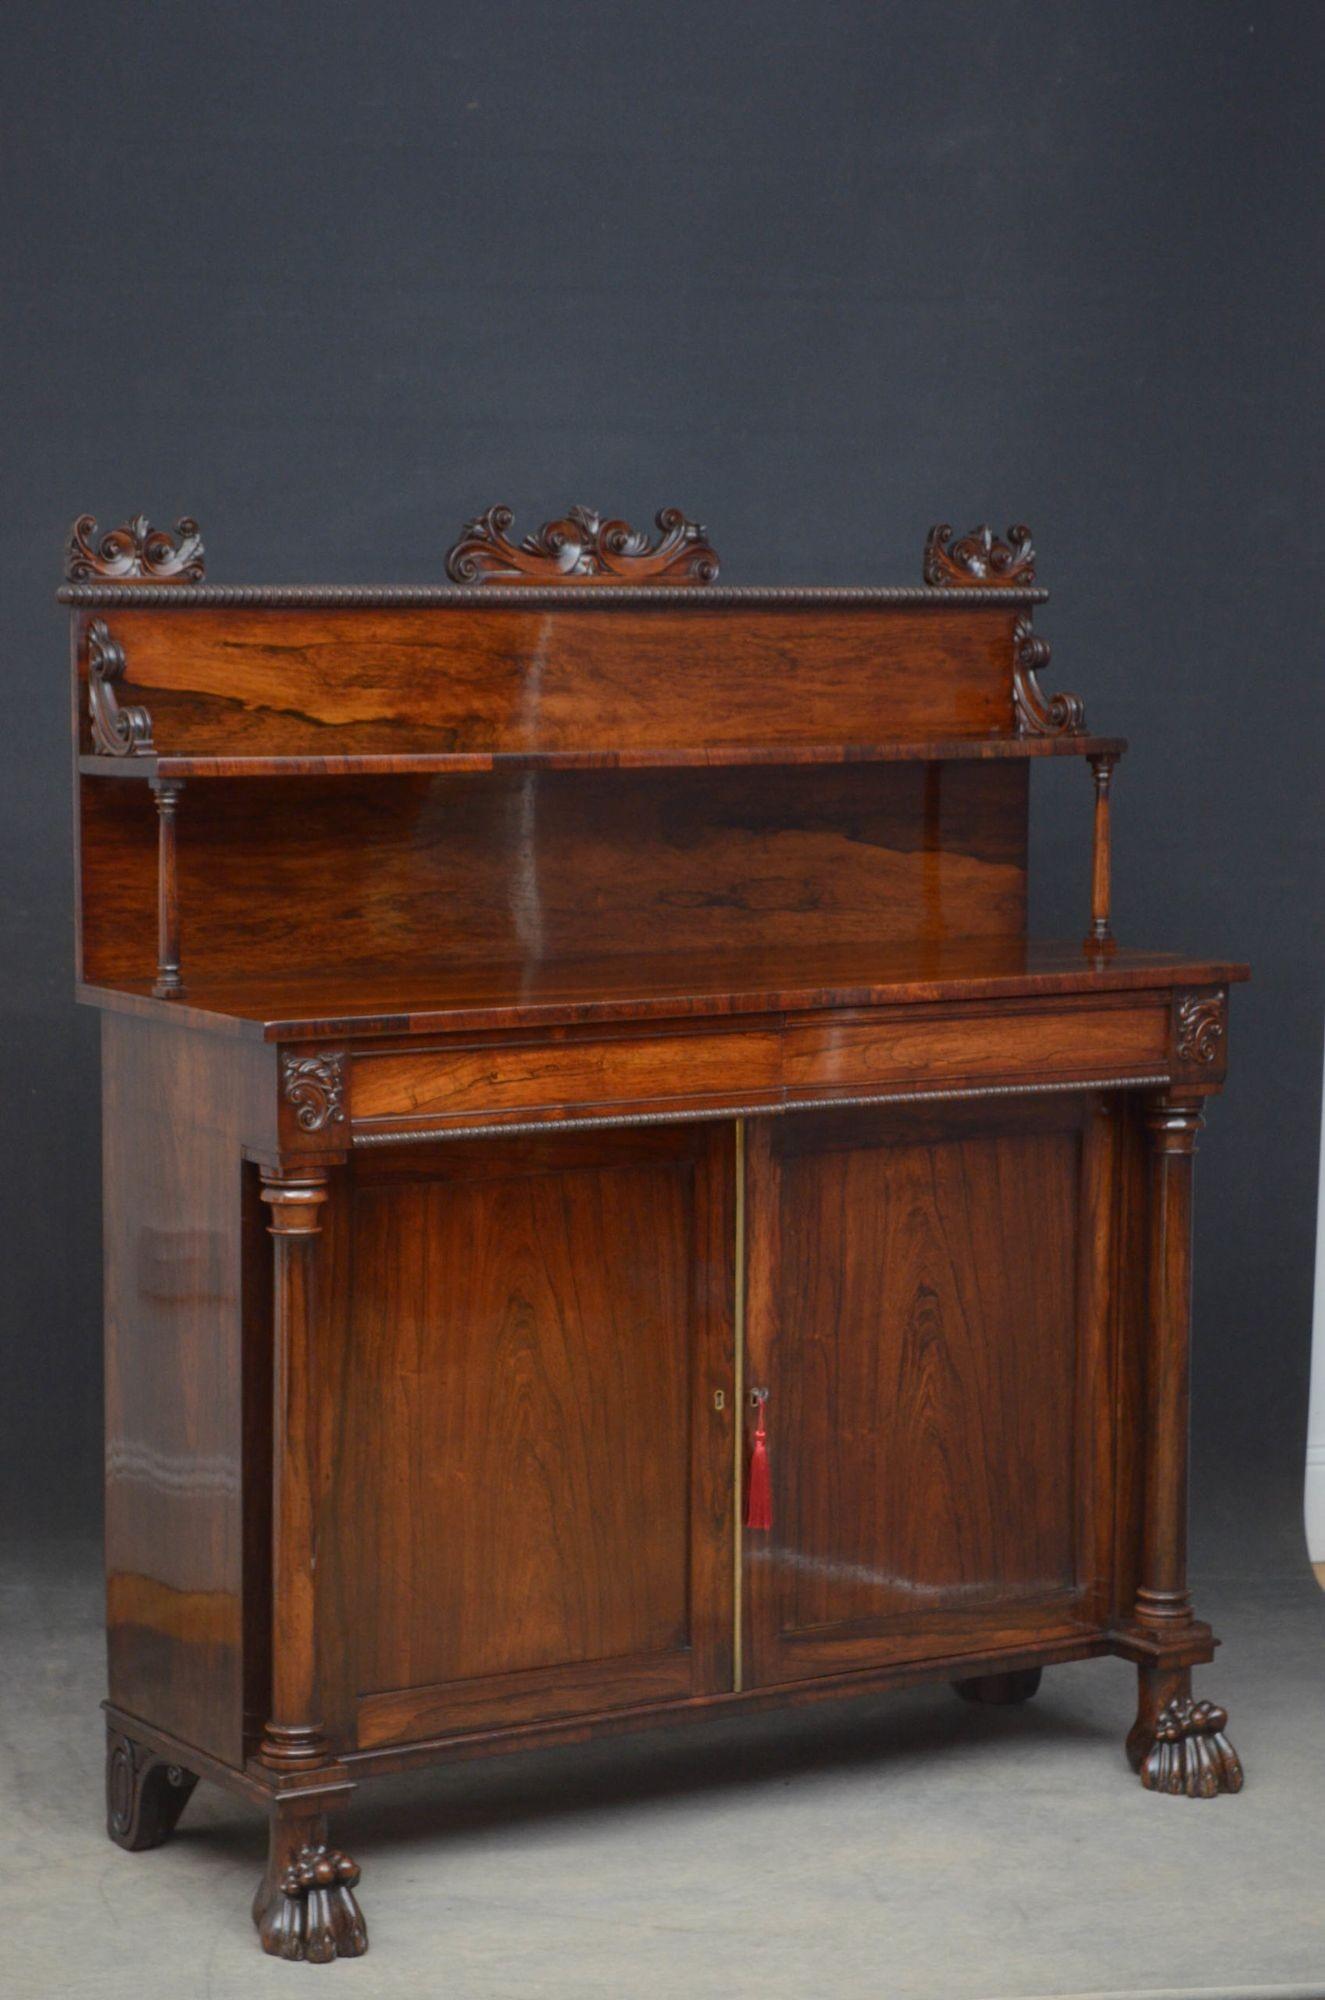 Sn5051, outstanding Regency two door sideboard in rosewood, having a shelf to the back with finely carved decoration to the top and quadrant beaded edge flanked by C shaped carvings, all supported on turned columns above a fantastic grained top, two